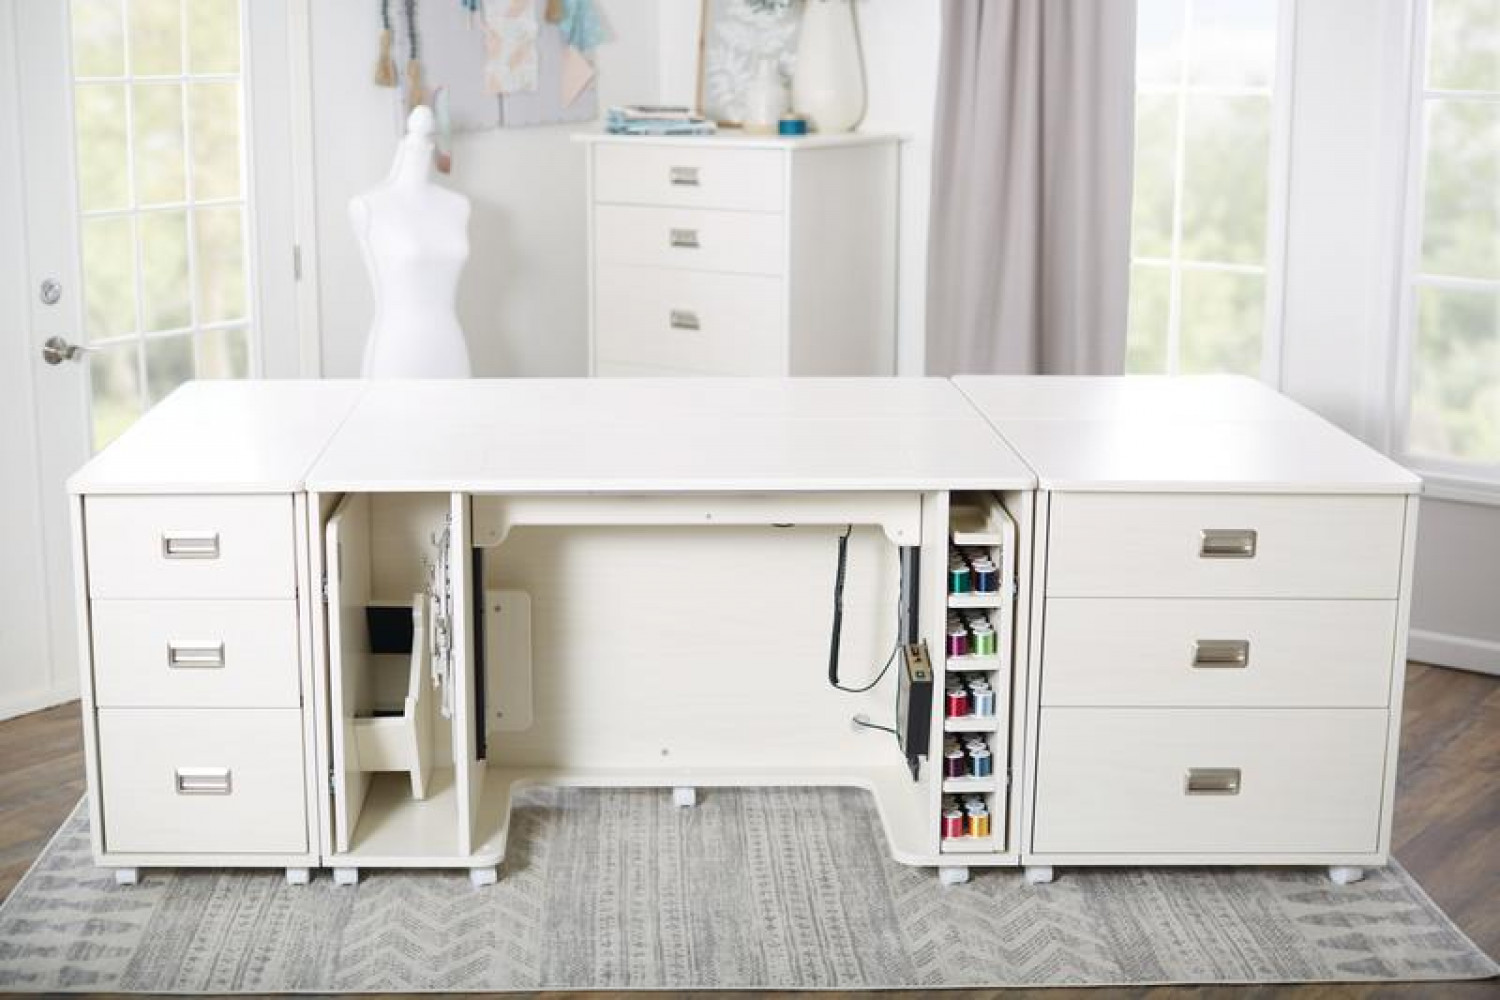 The Koala Studios Embroidery Center with the Slim Caddy and Three Drawer Caddy